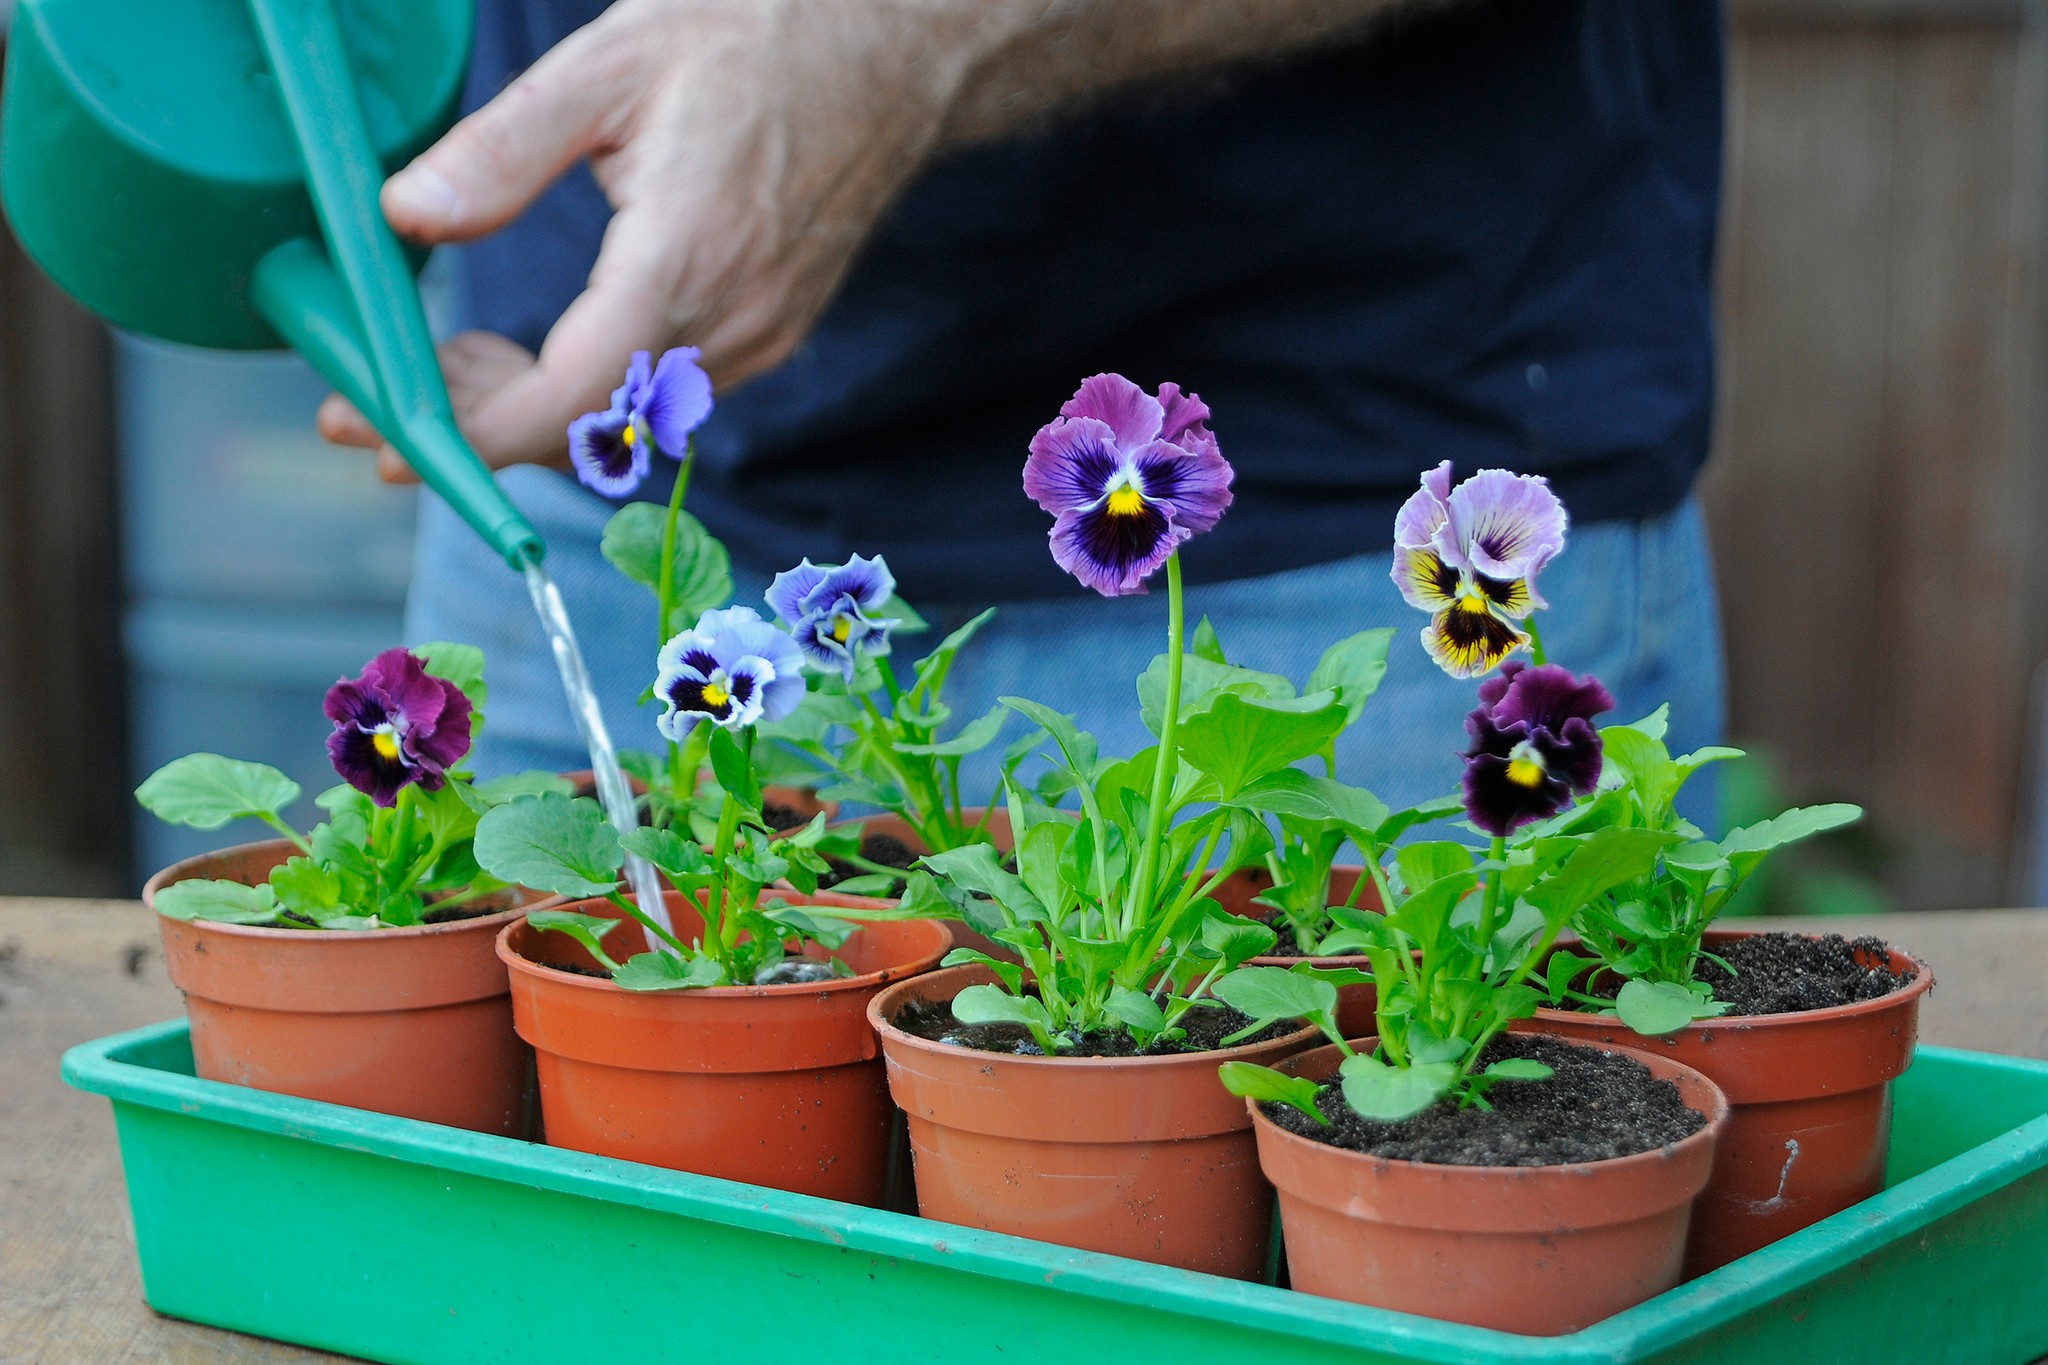 How to grow pansies - watering young pansy plants